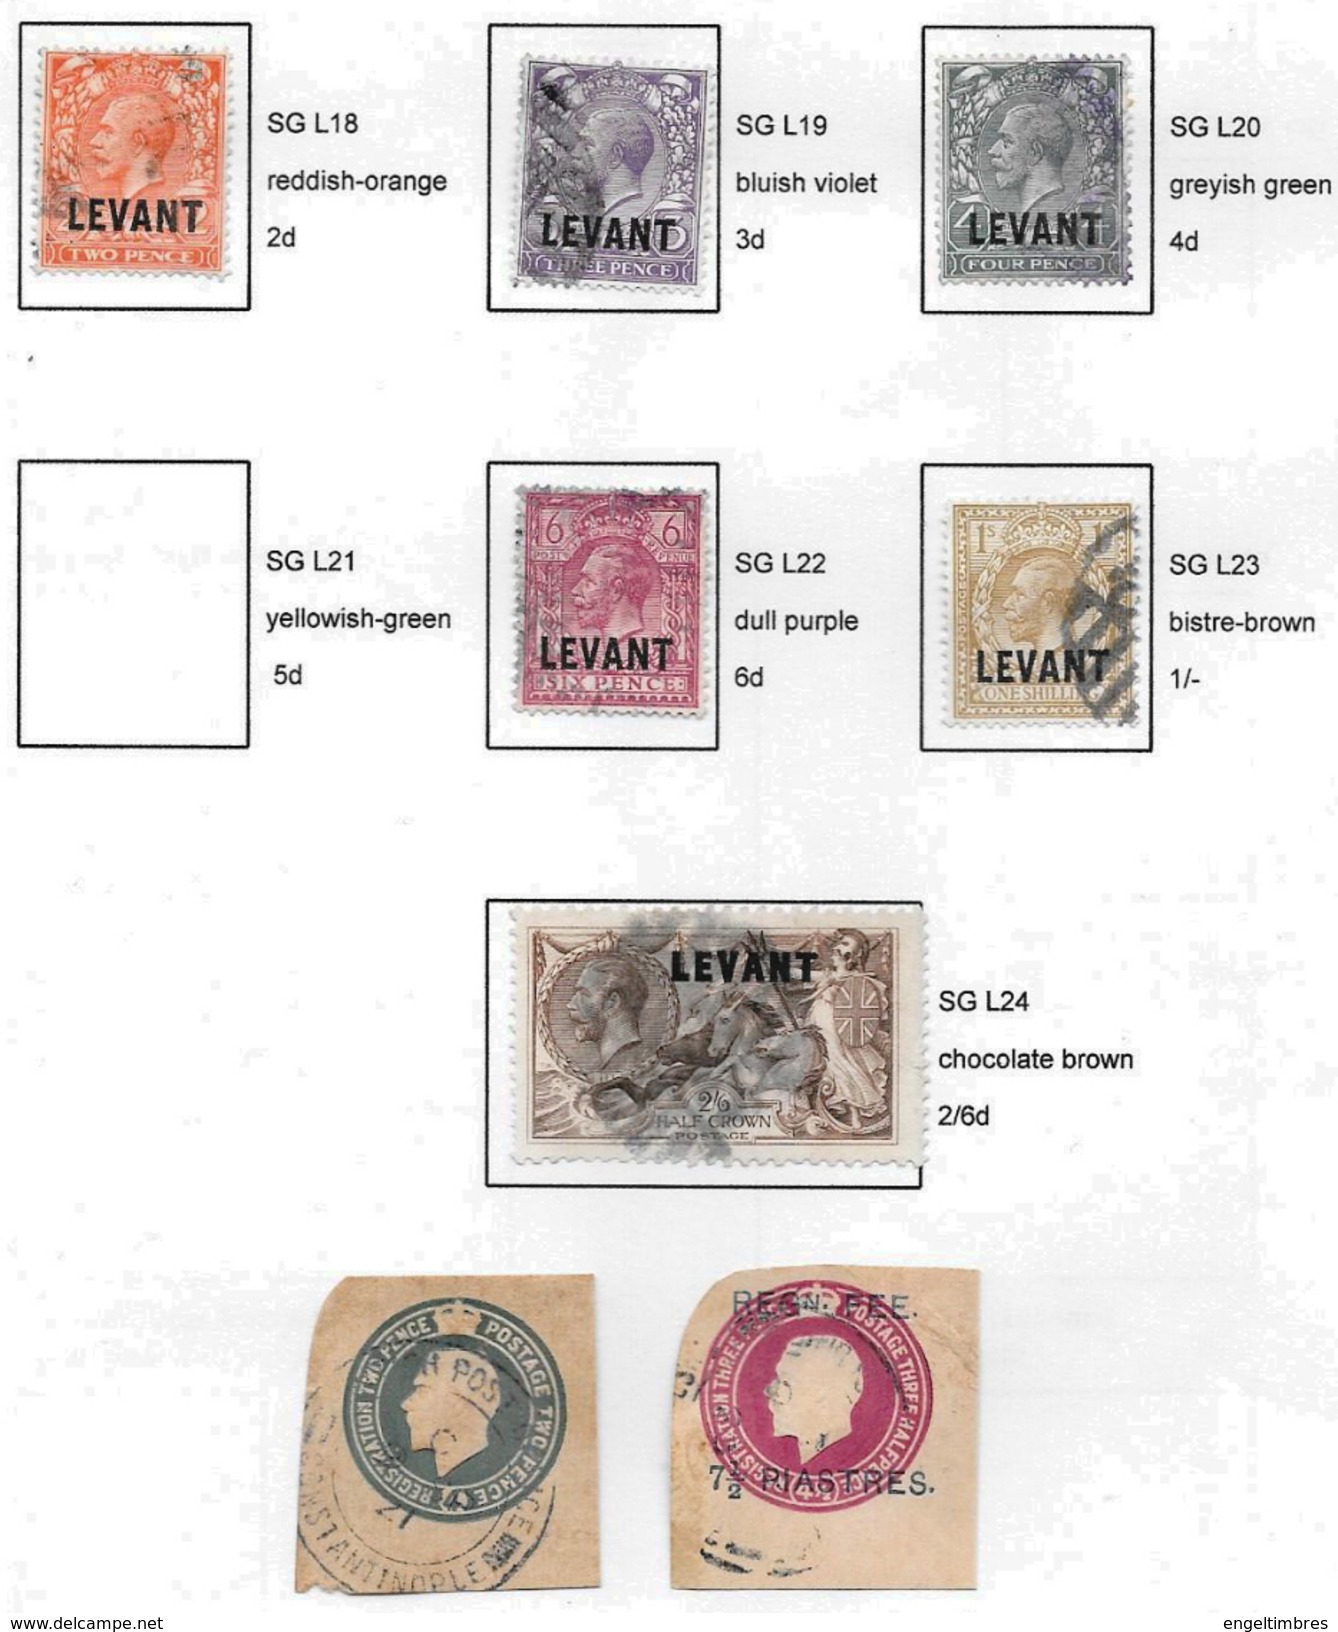 British LEVANT - 1921  George 5th  Overprinted  "LEVANT" SG L18 - L20 And L22 - L24  (6 Stamps) + Extras - USED - Brits-Levant